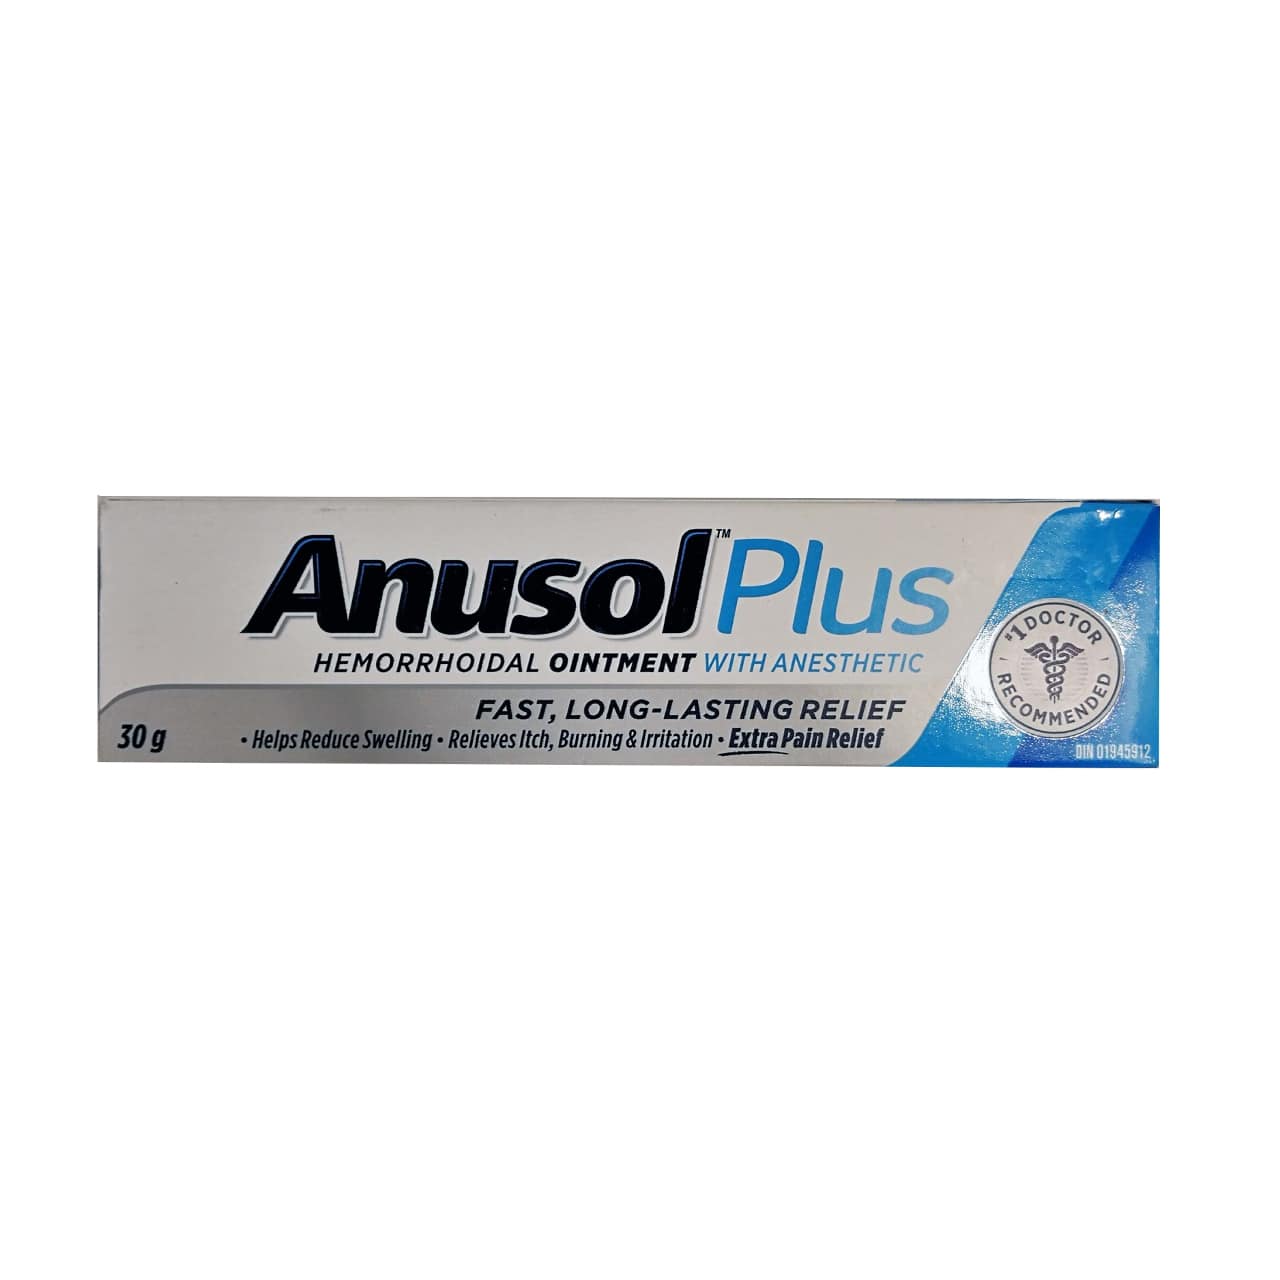 Product package for Anusol Plus Hemorrhoidal Ointment with Anesthetic in English